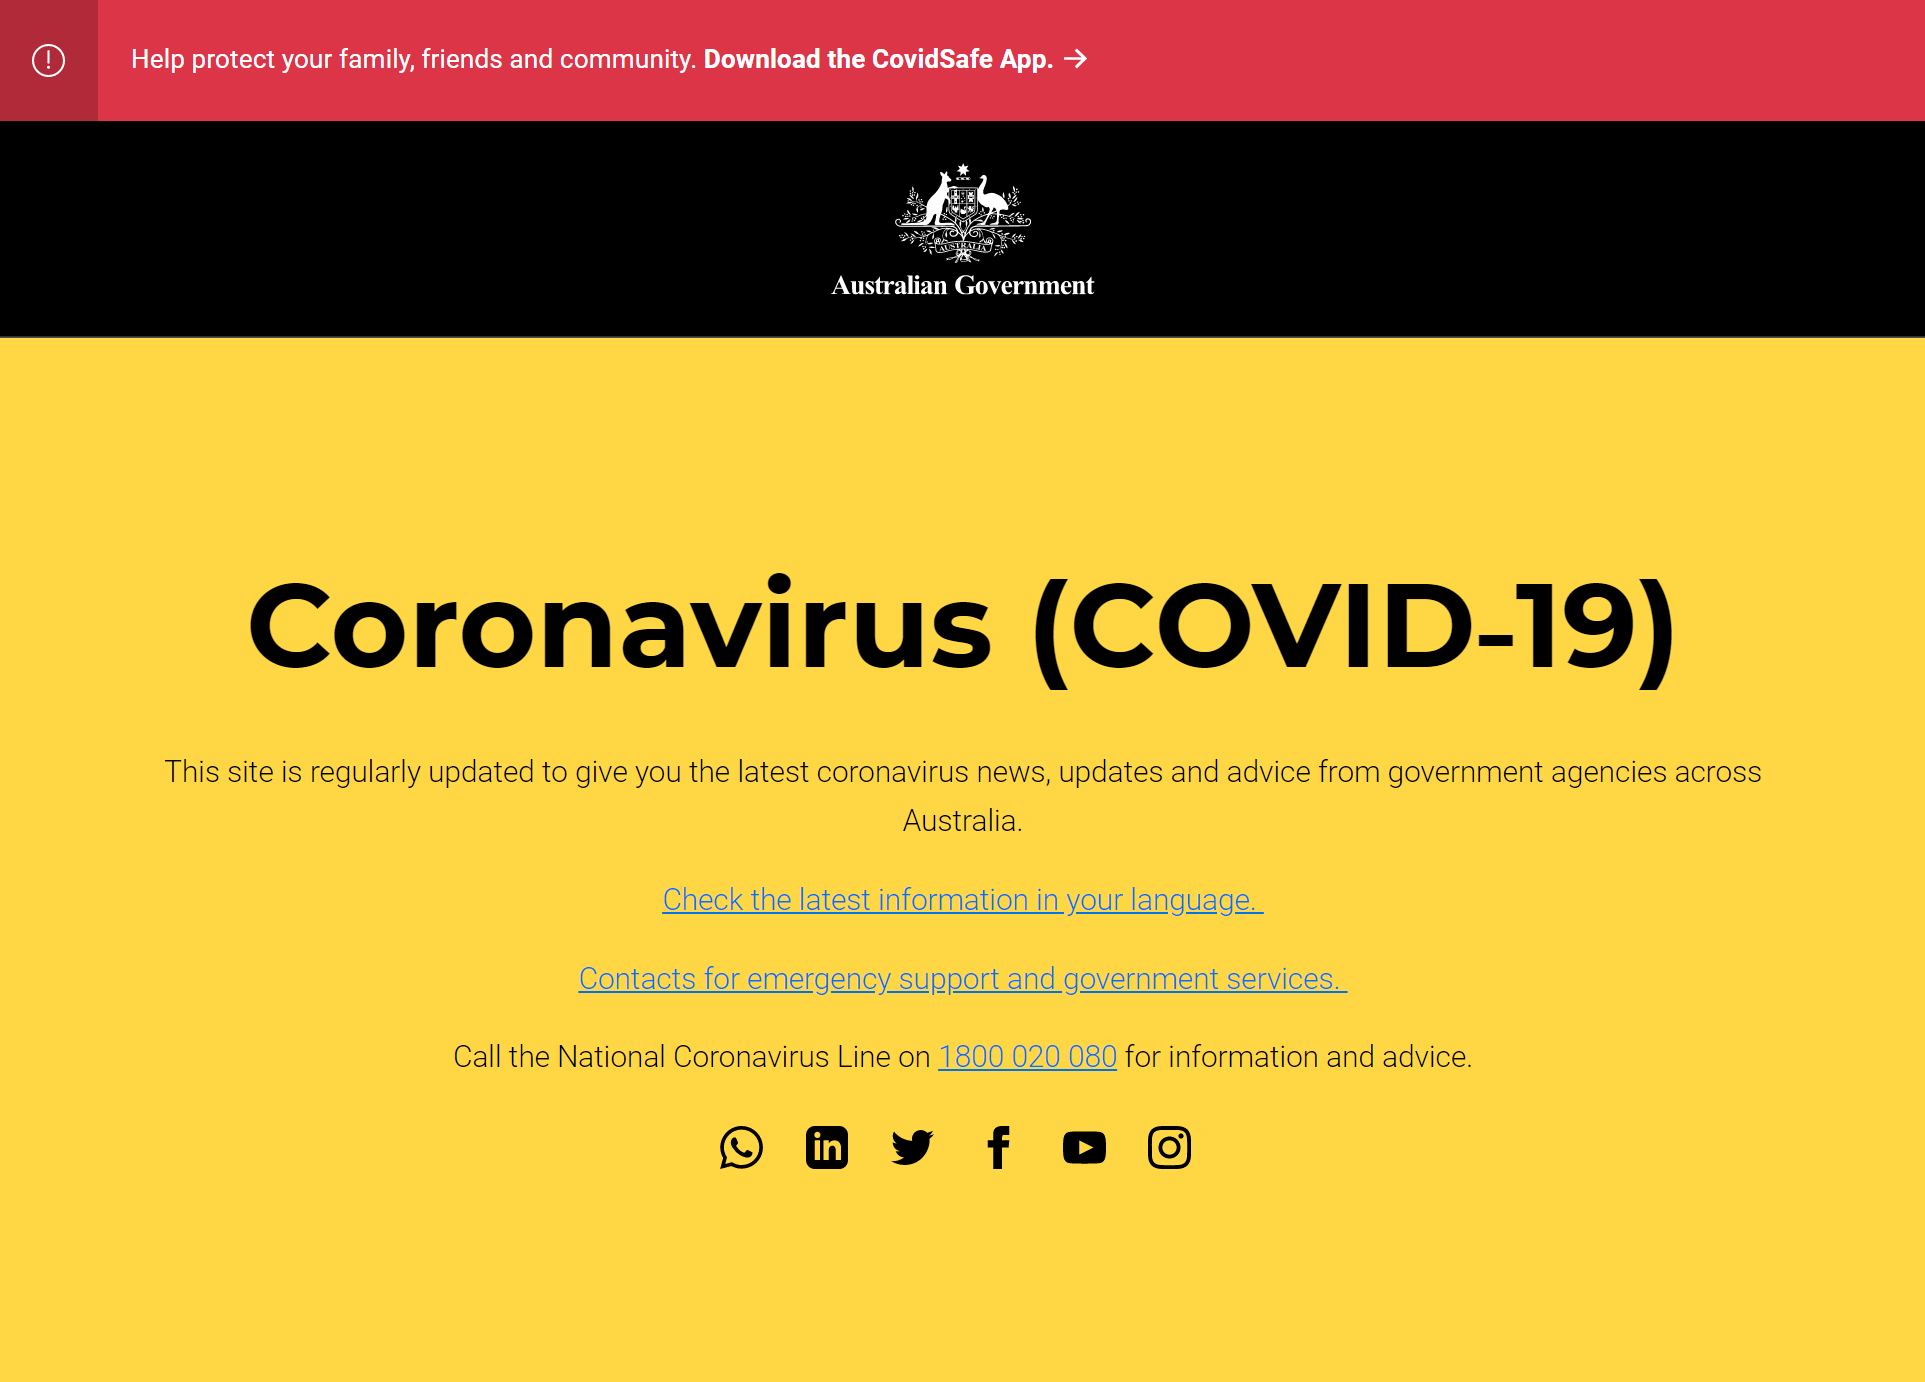 The Australian government has replaced its main government homepage with a landing page of resources about the coronavirus epidemic.